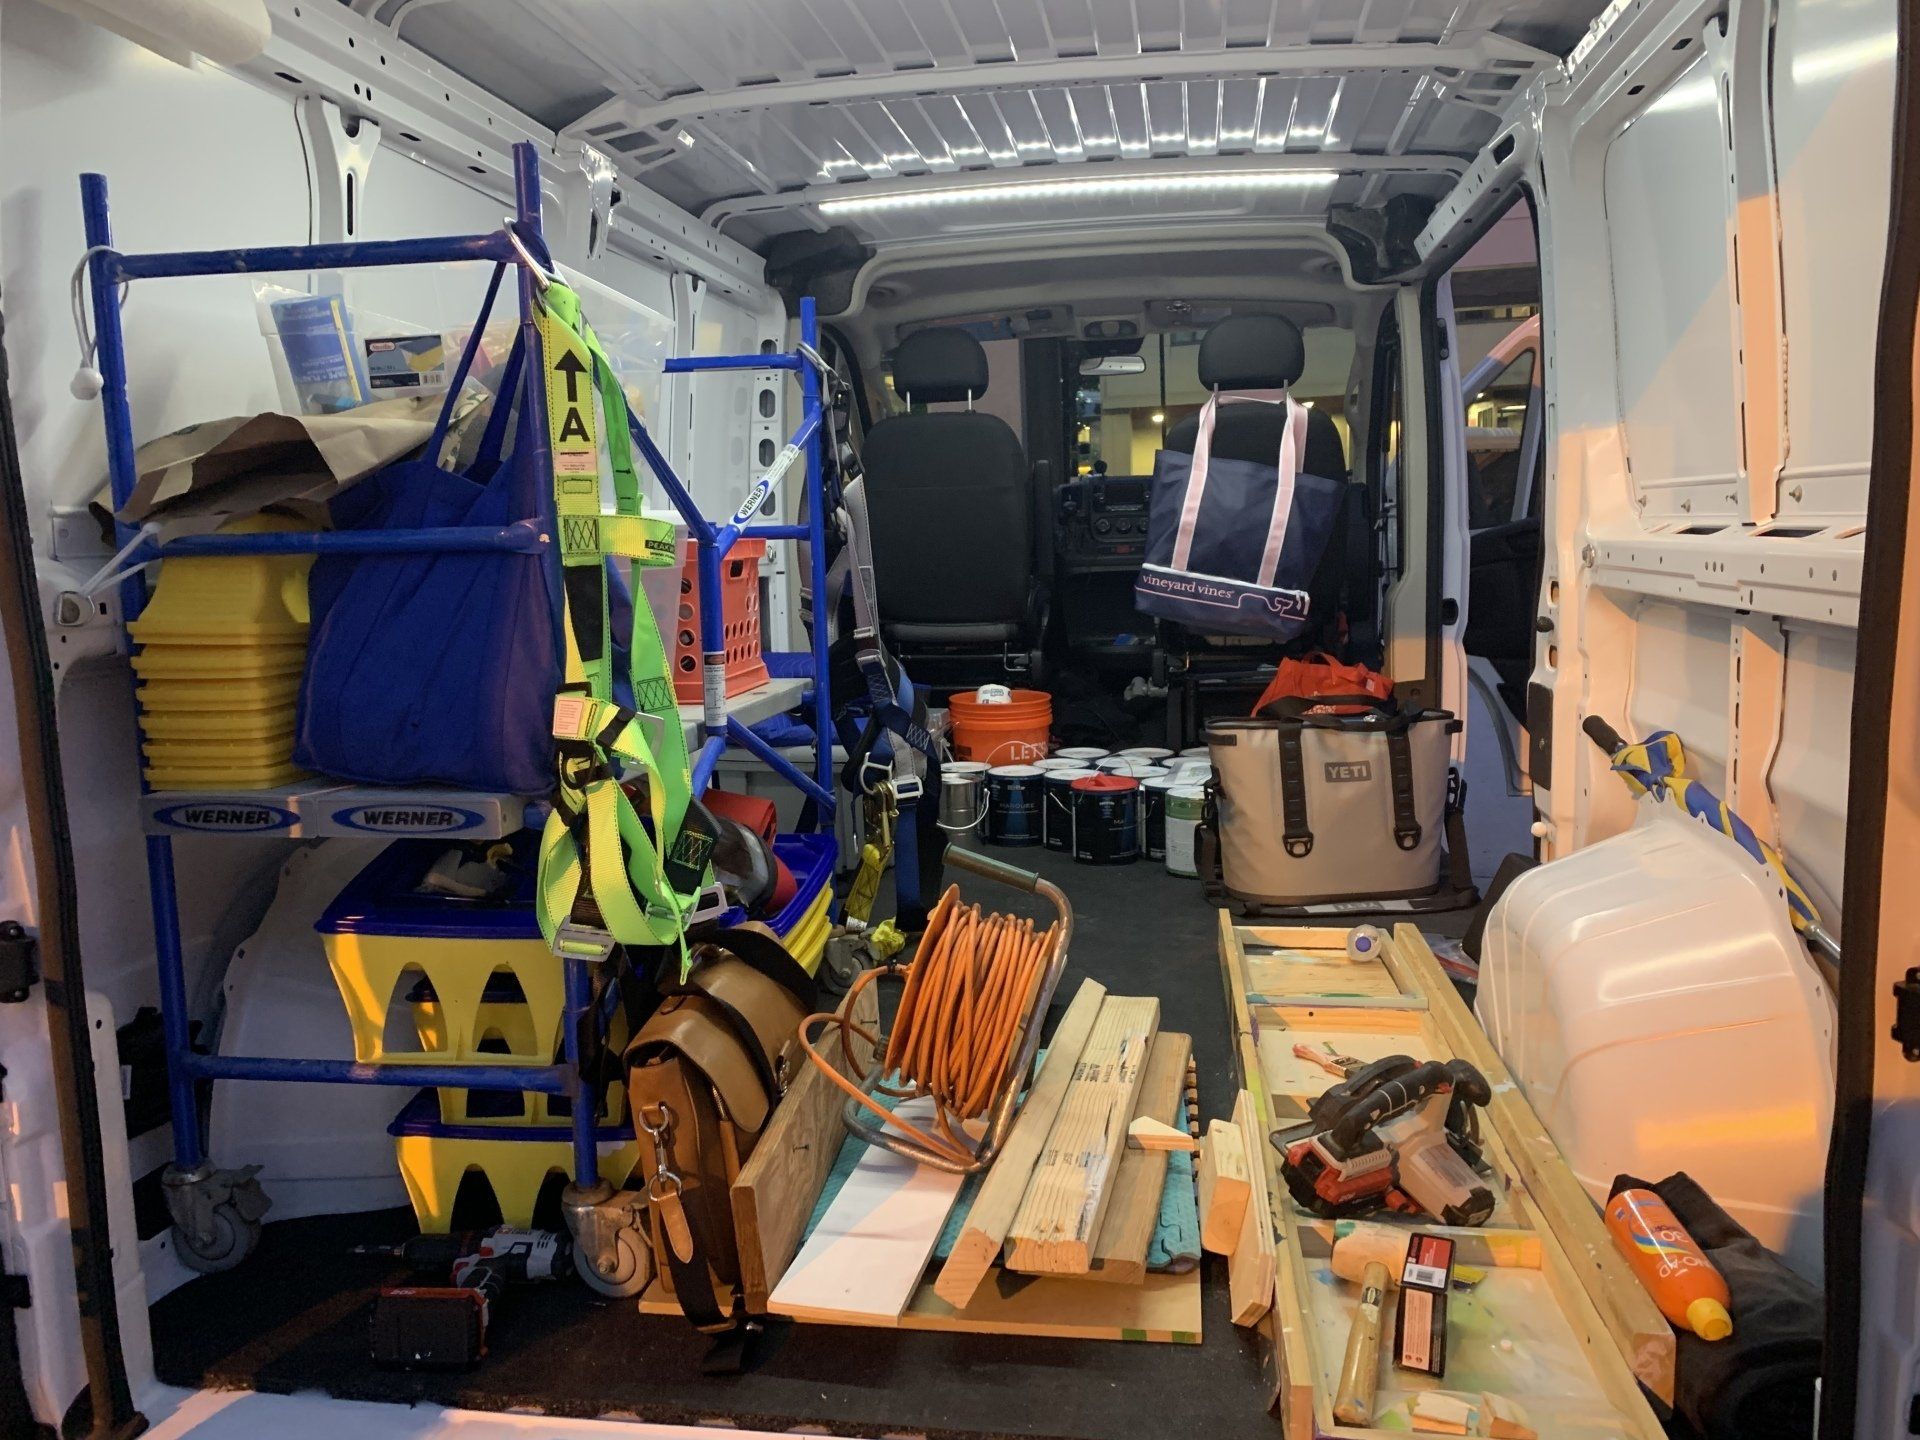 The artist's vehicle carrying all the equipment